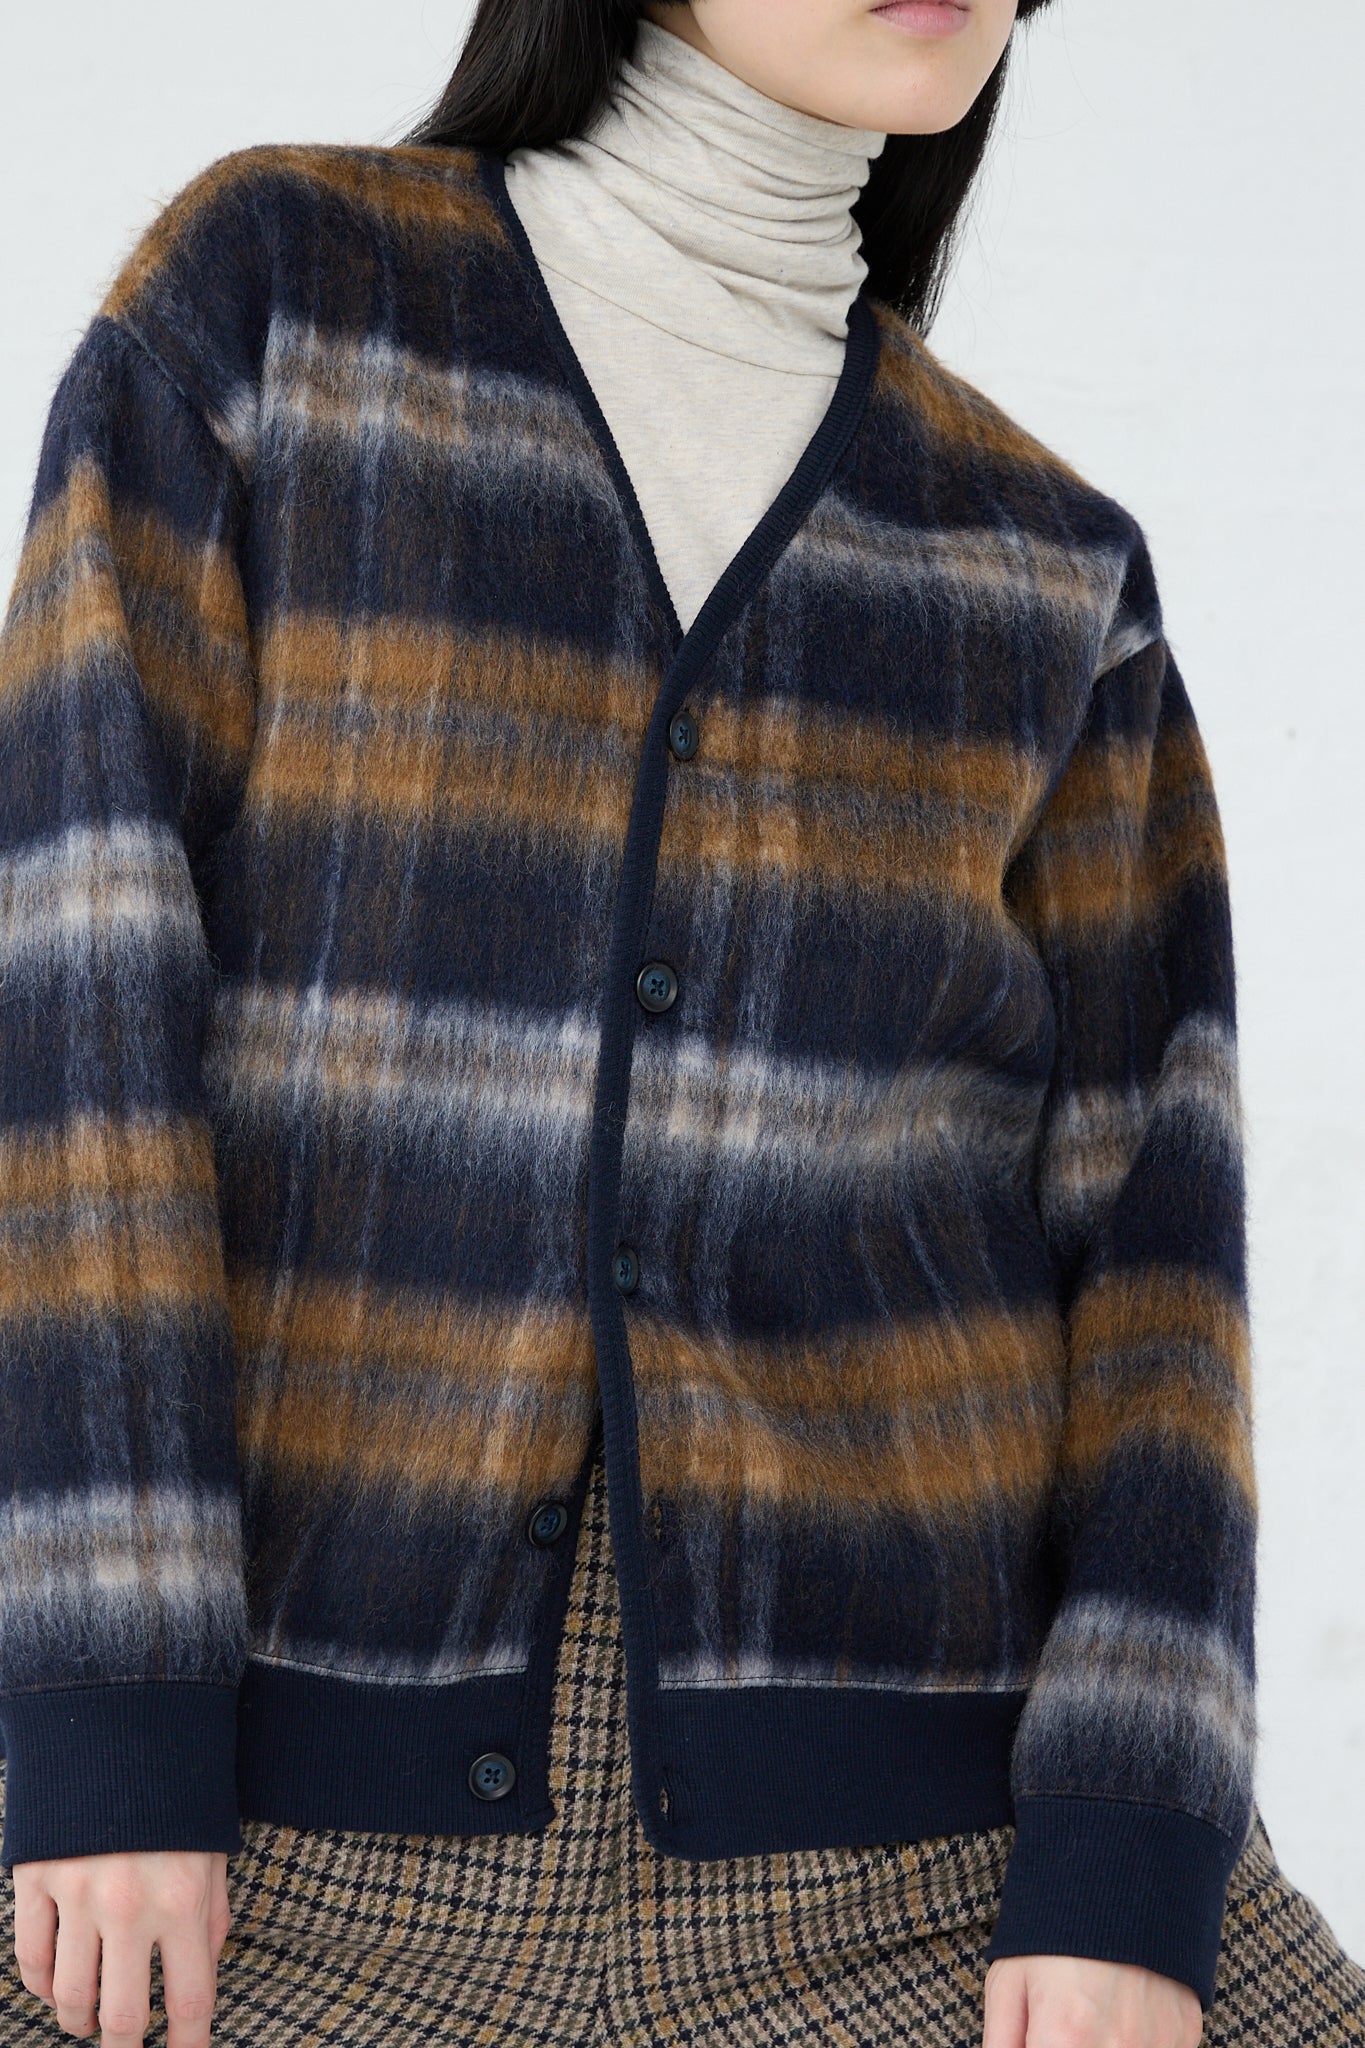 The model is wearing an Ichi Knit Cardigan in Navy, featuring a v-neck and shades of blue and brown. Up close. 